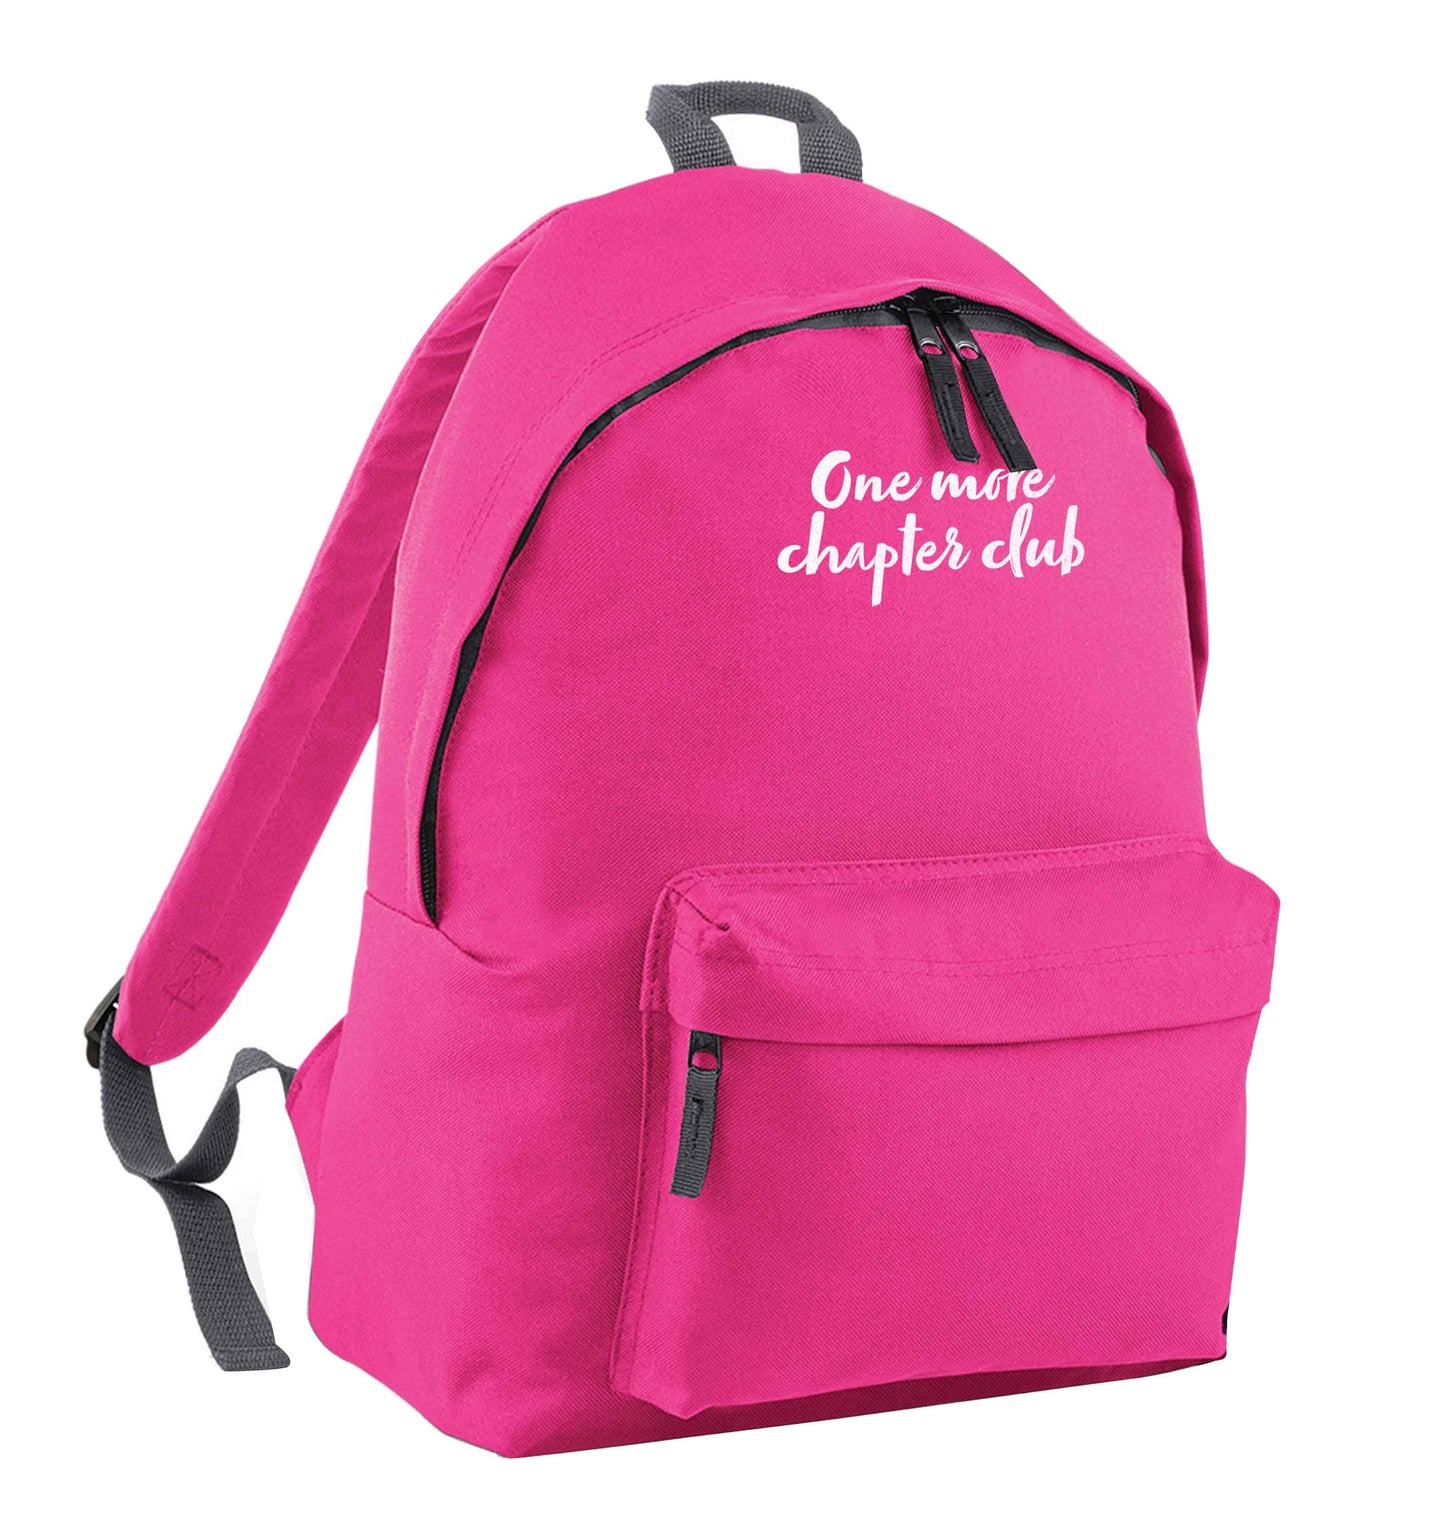 One more chapter club Kit pink children's backpack